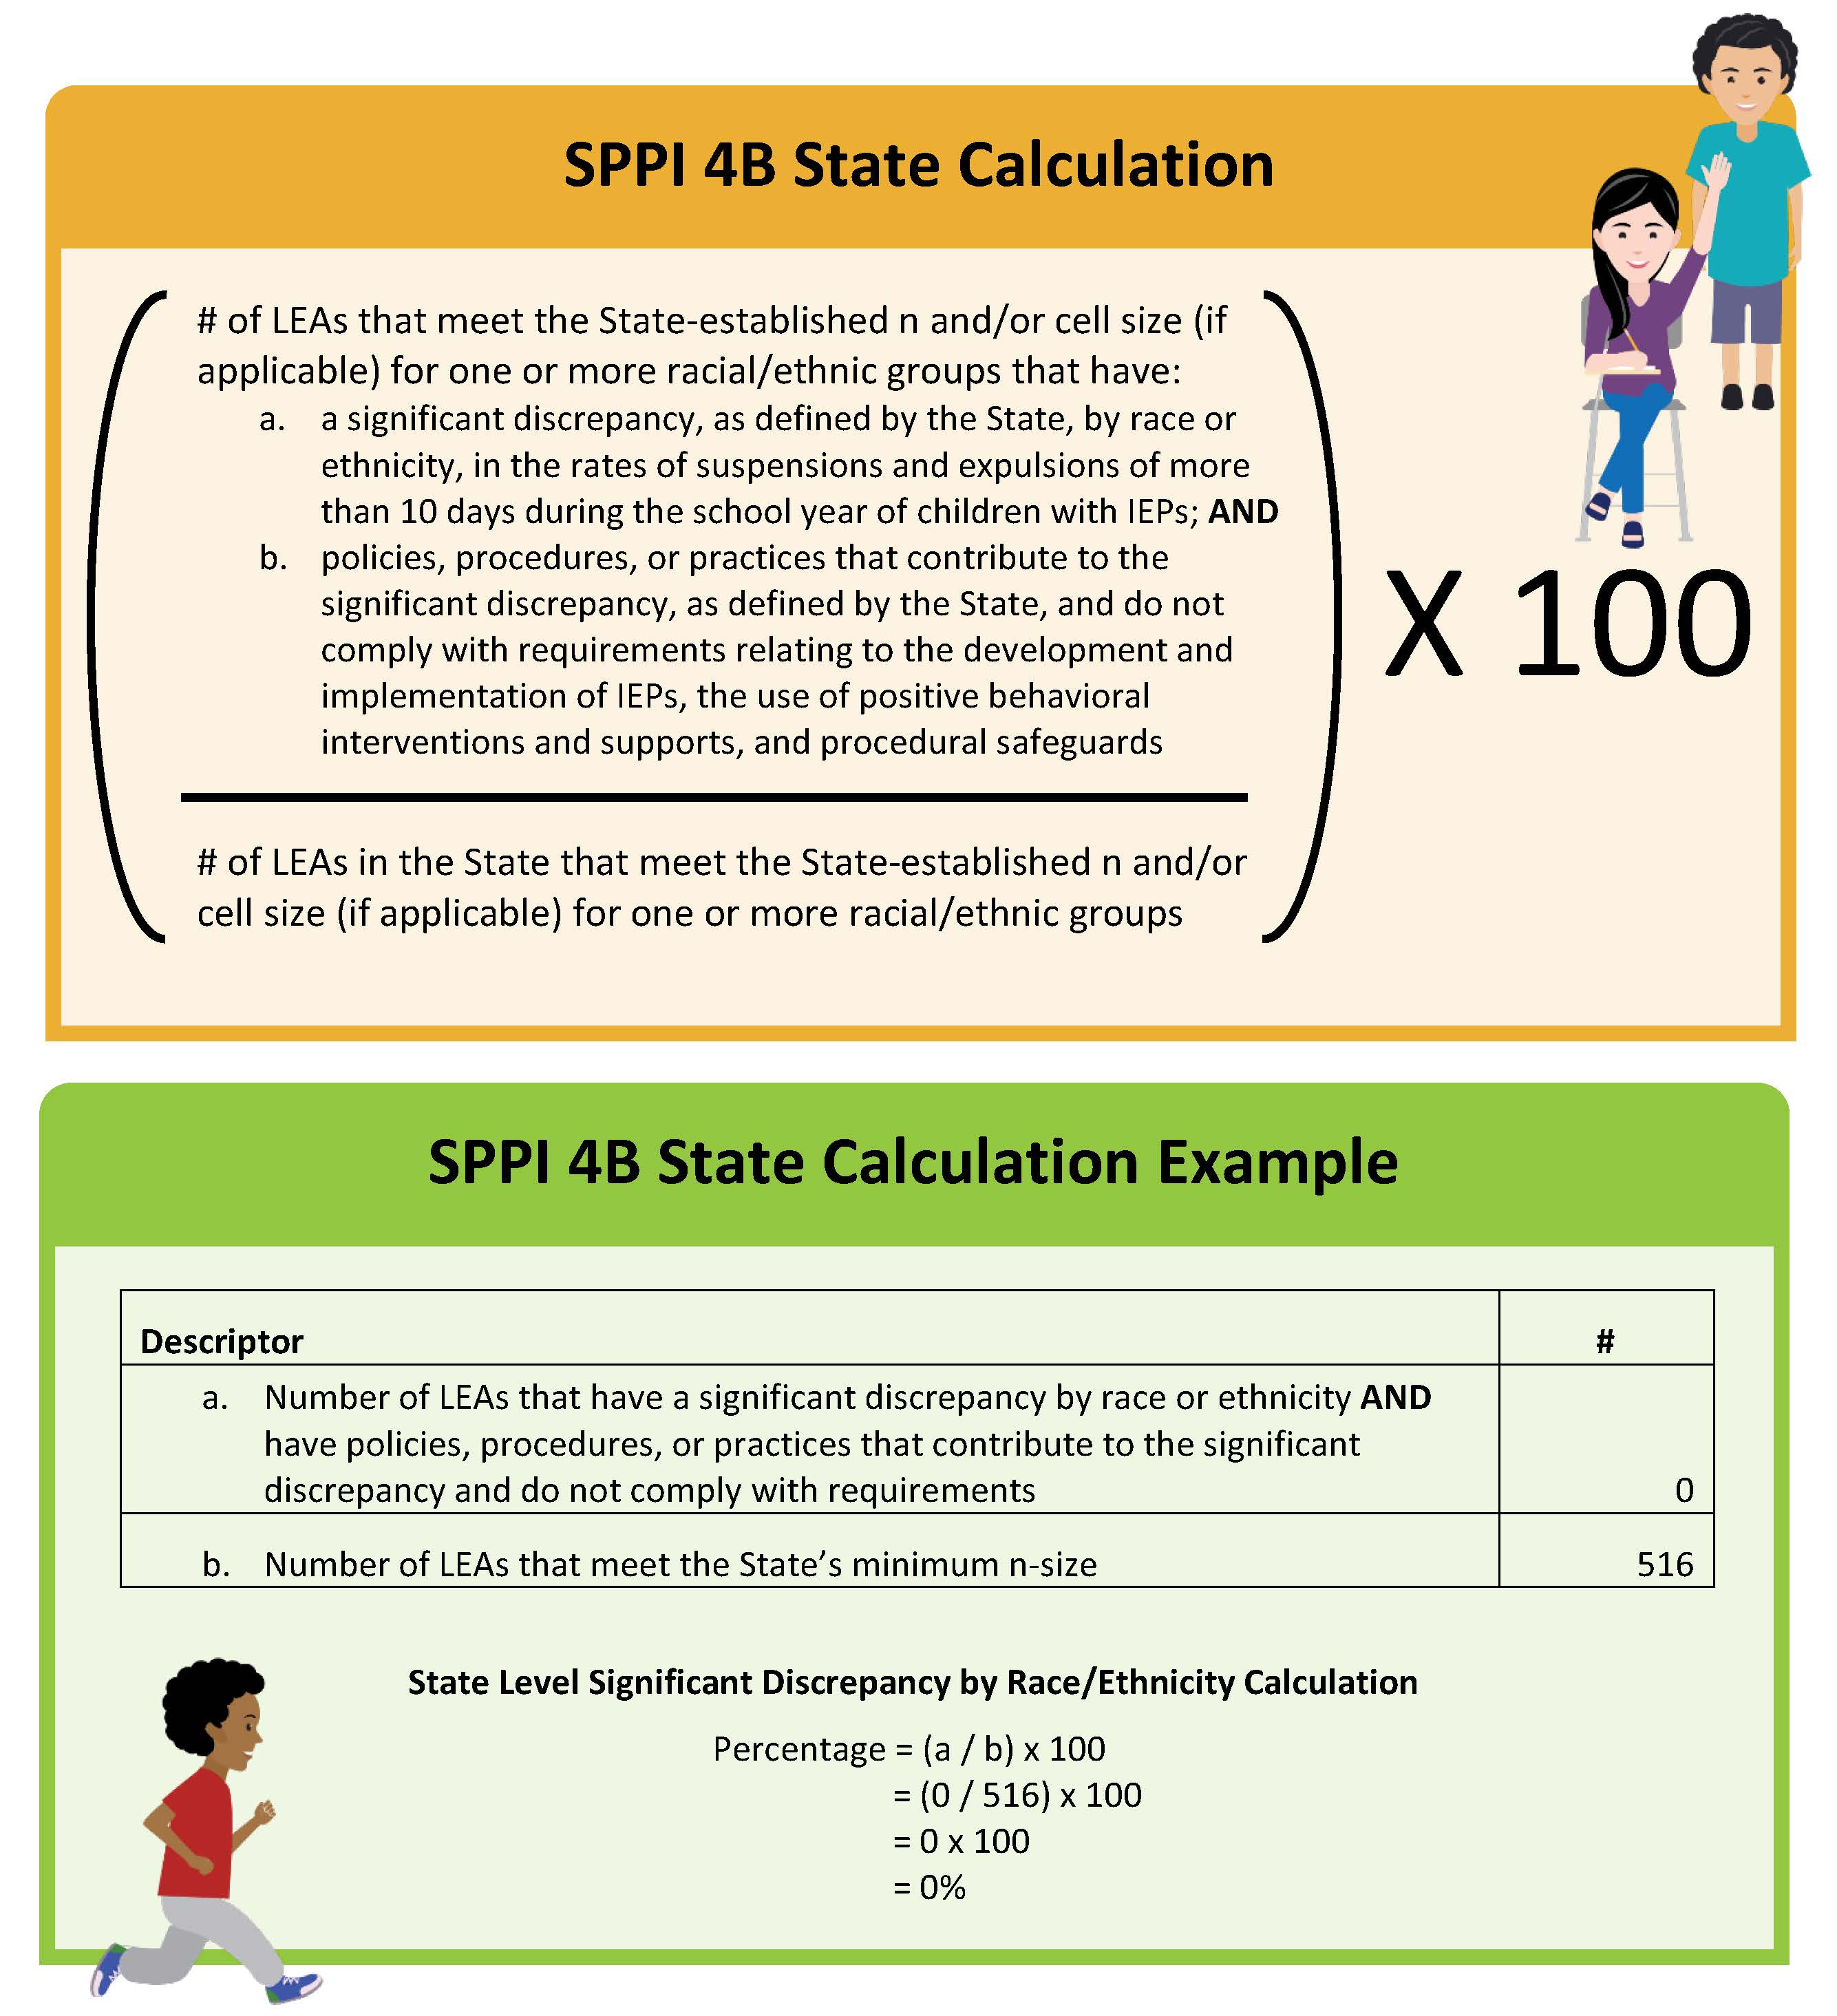 SPPI 4B Calculation and Example